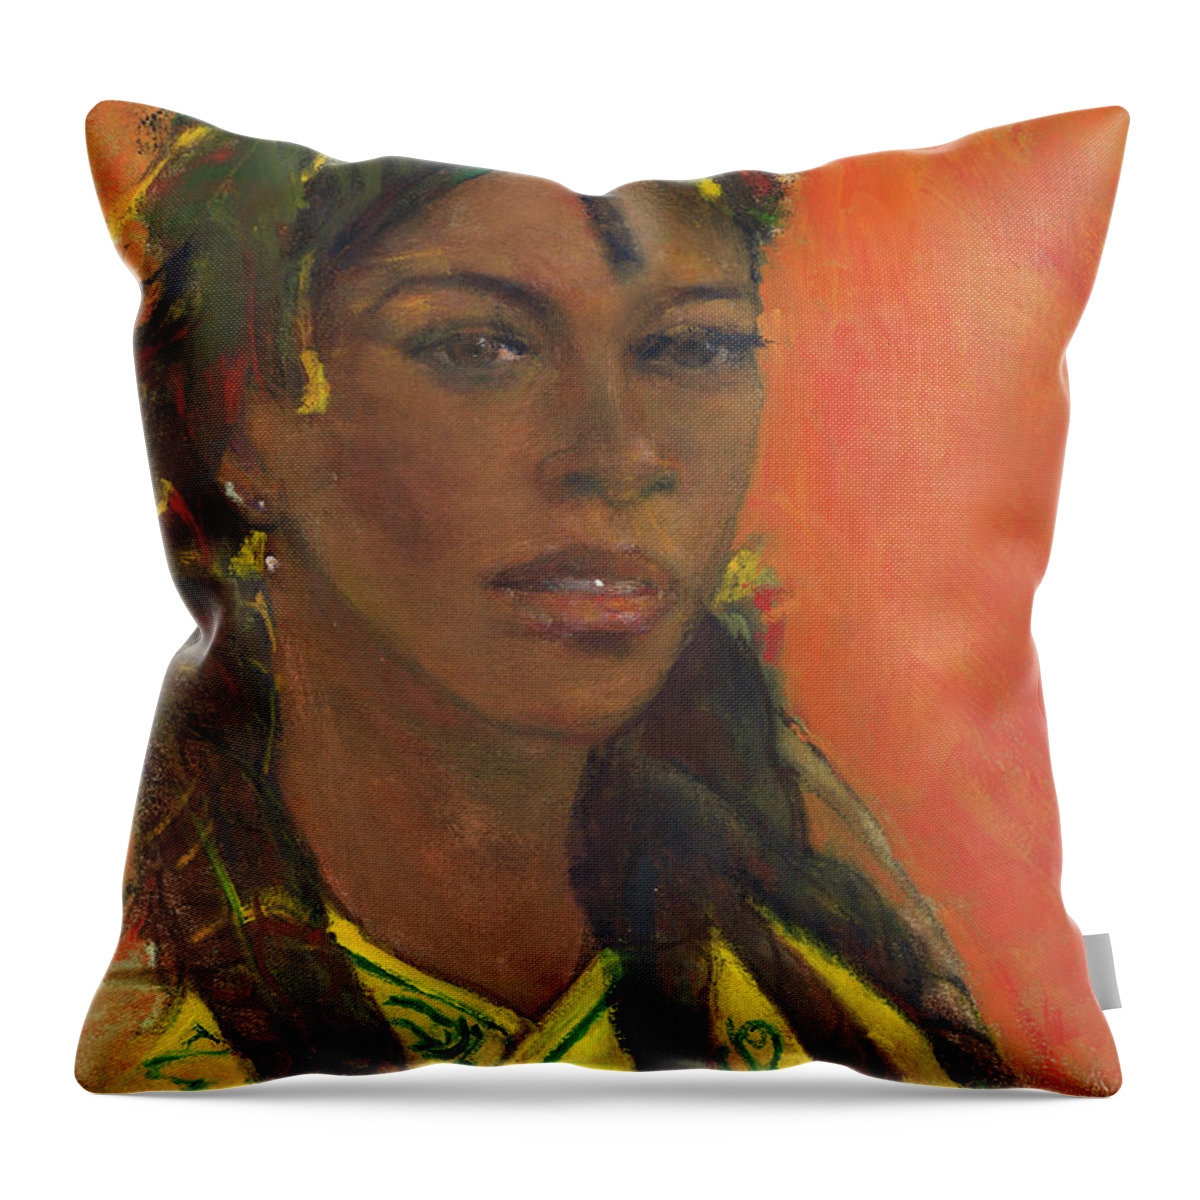 Dreadlocks Throw Pillow featuring the painting Dreadlocks Do Not Smell Like Weed by Kippax Williams